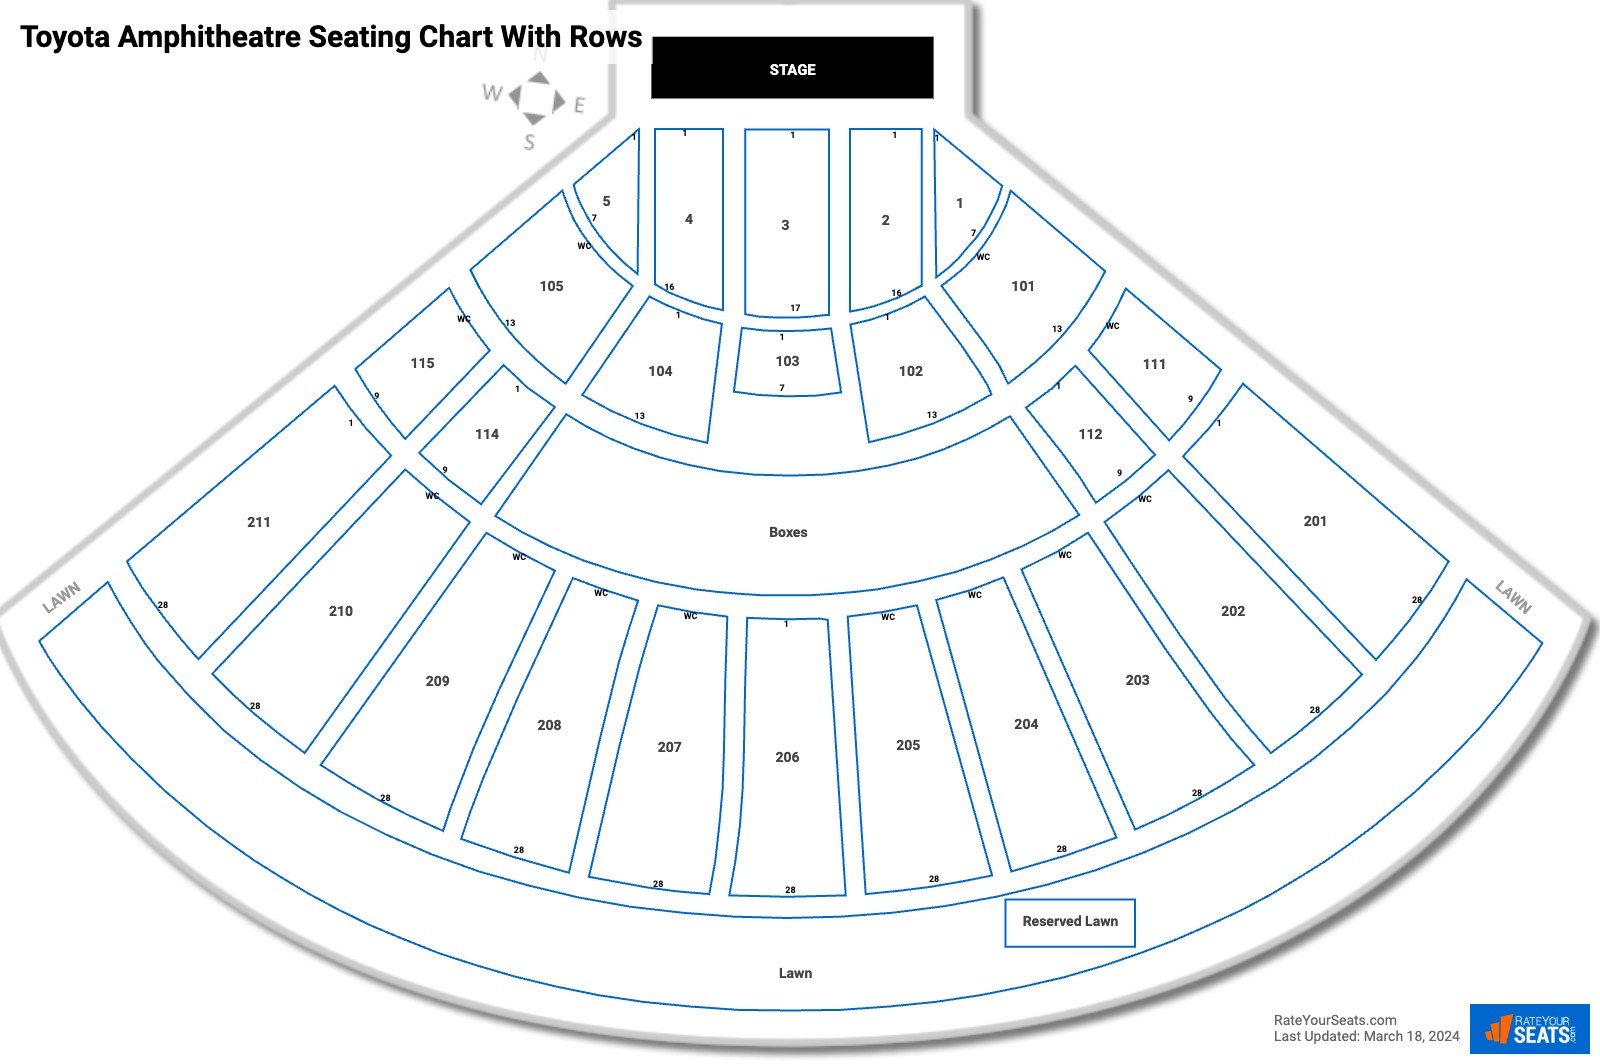 Toyota Amphitheatre seating chart with row numbers